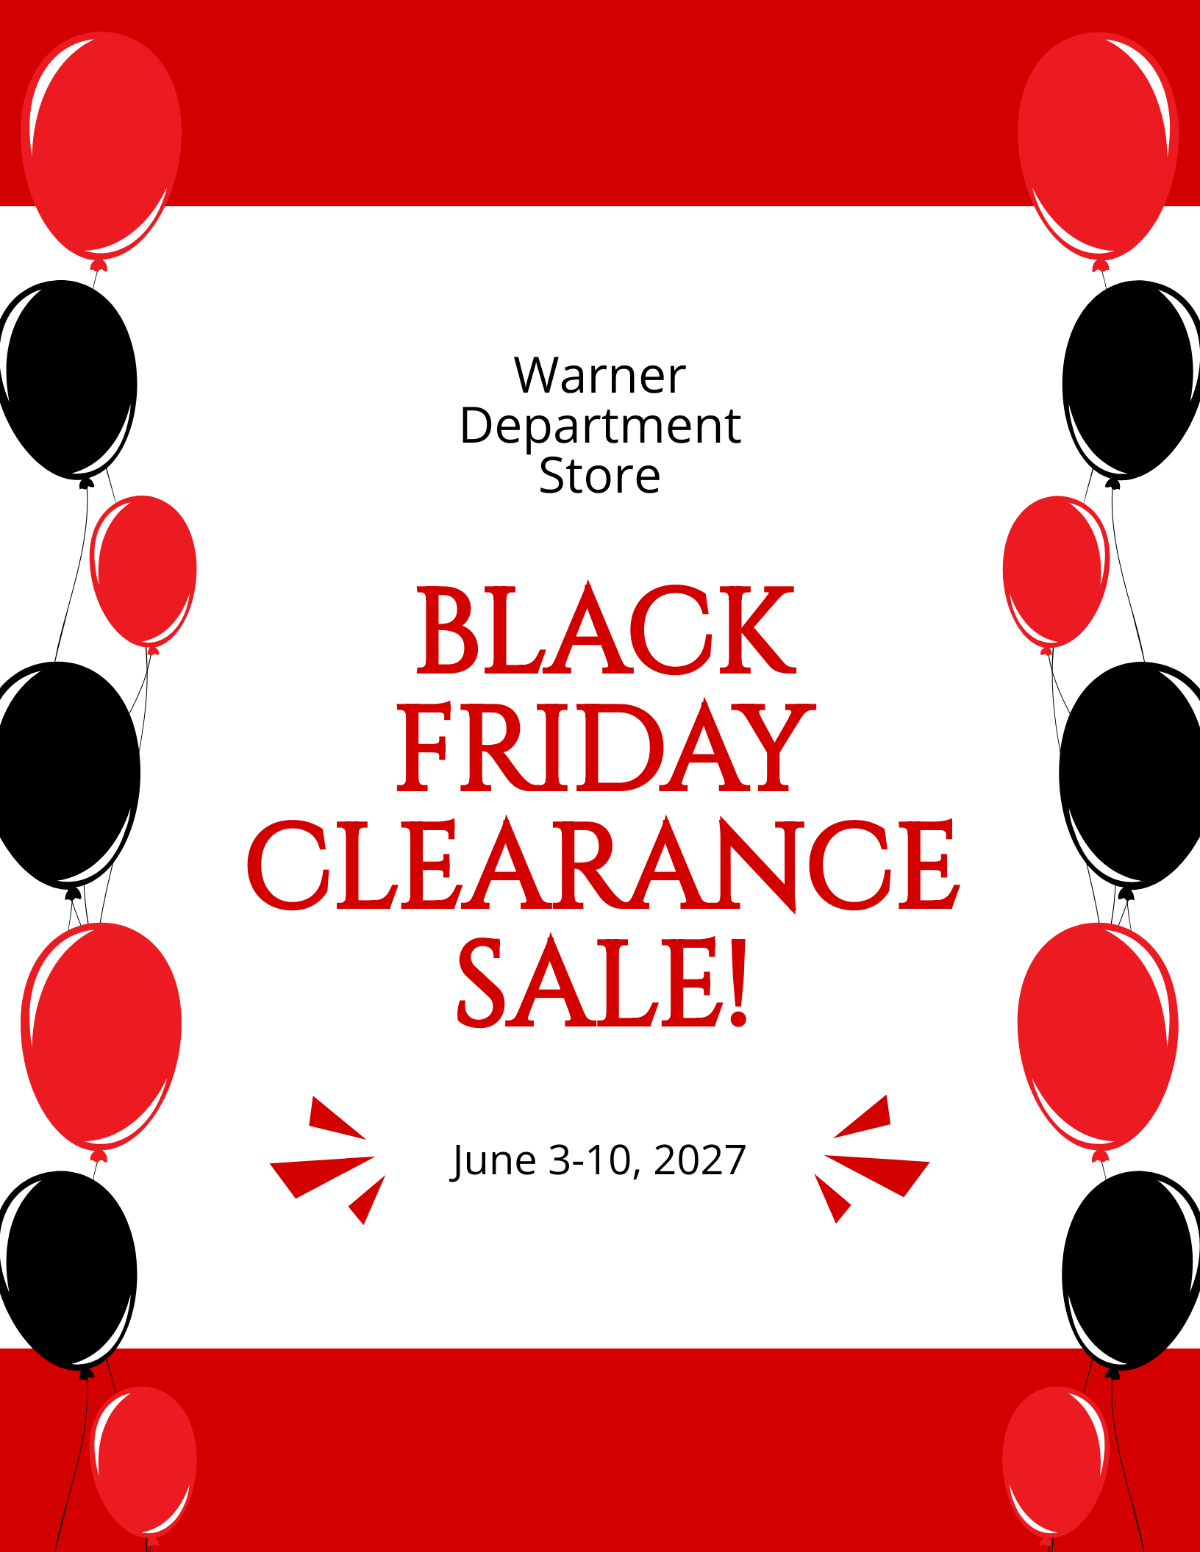 Black Friday Clearance Sale Flyer